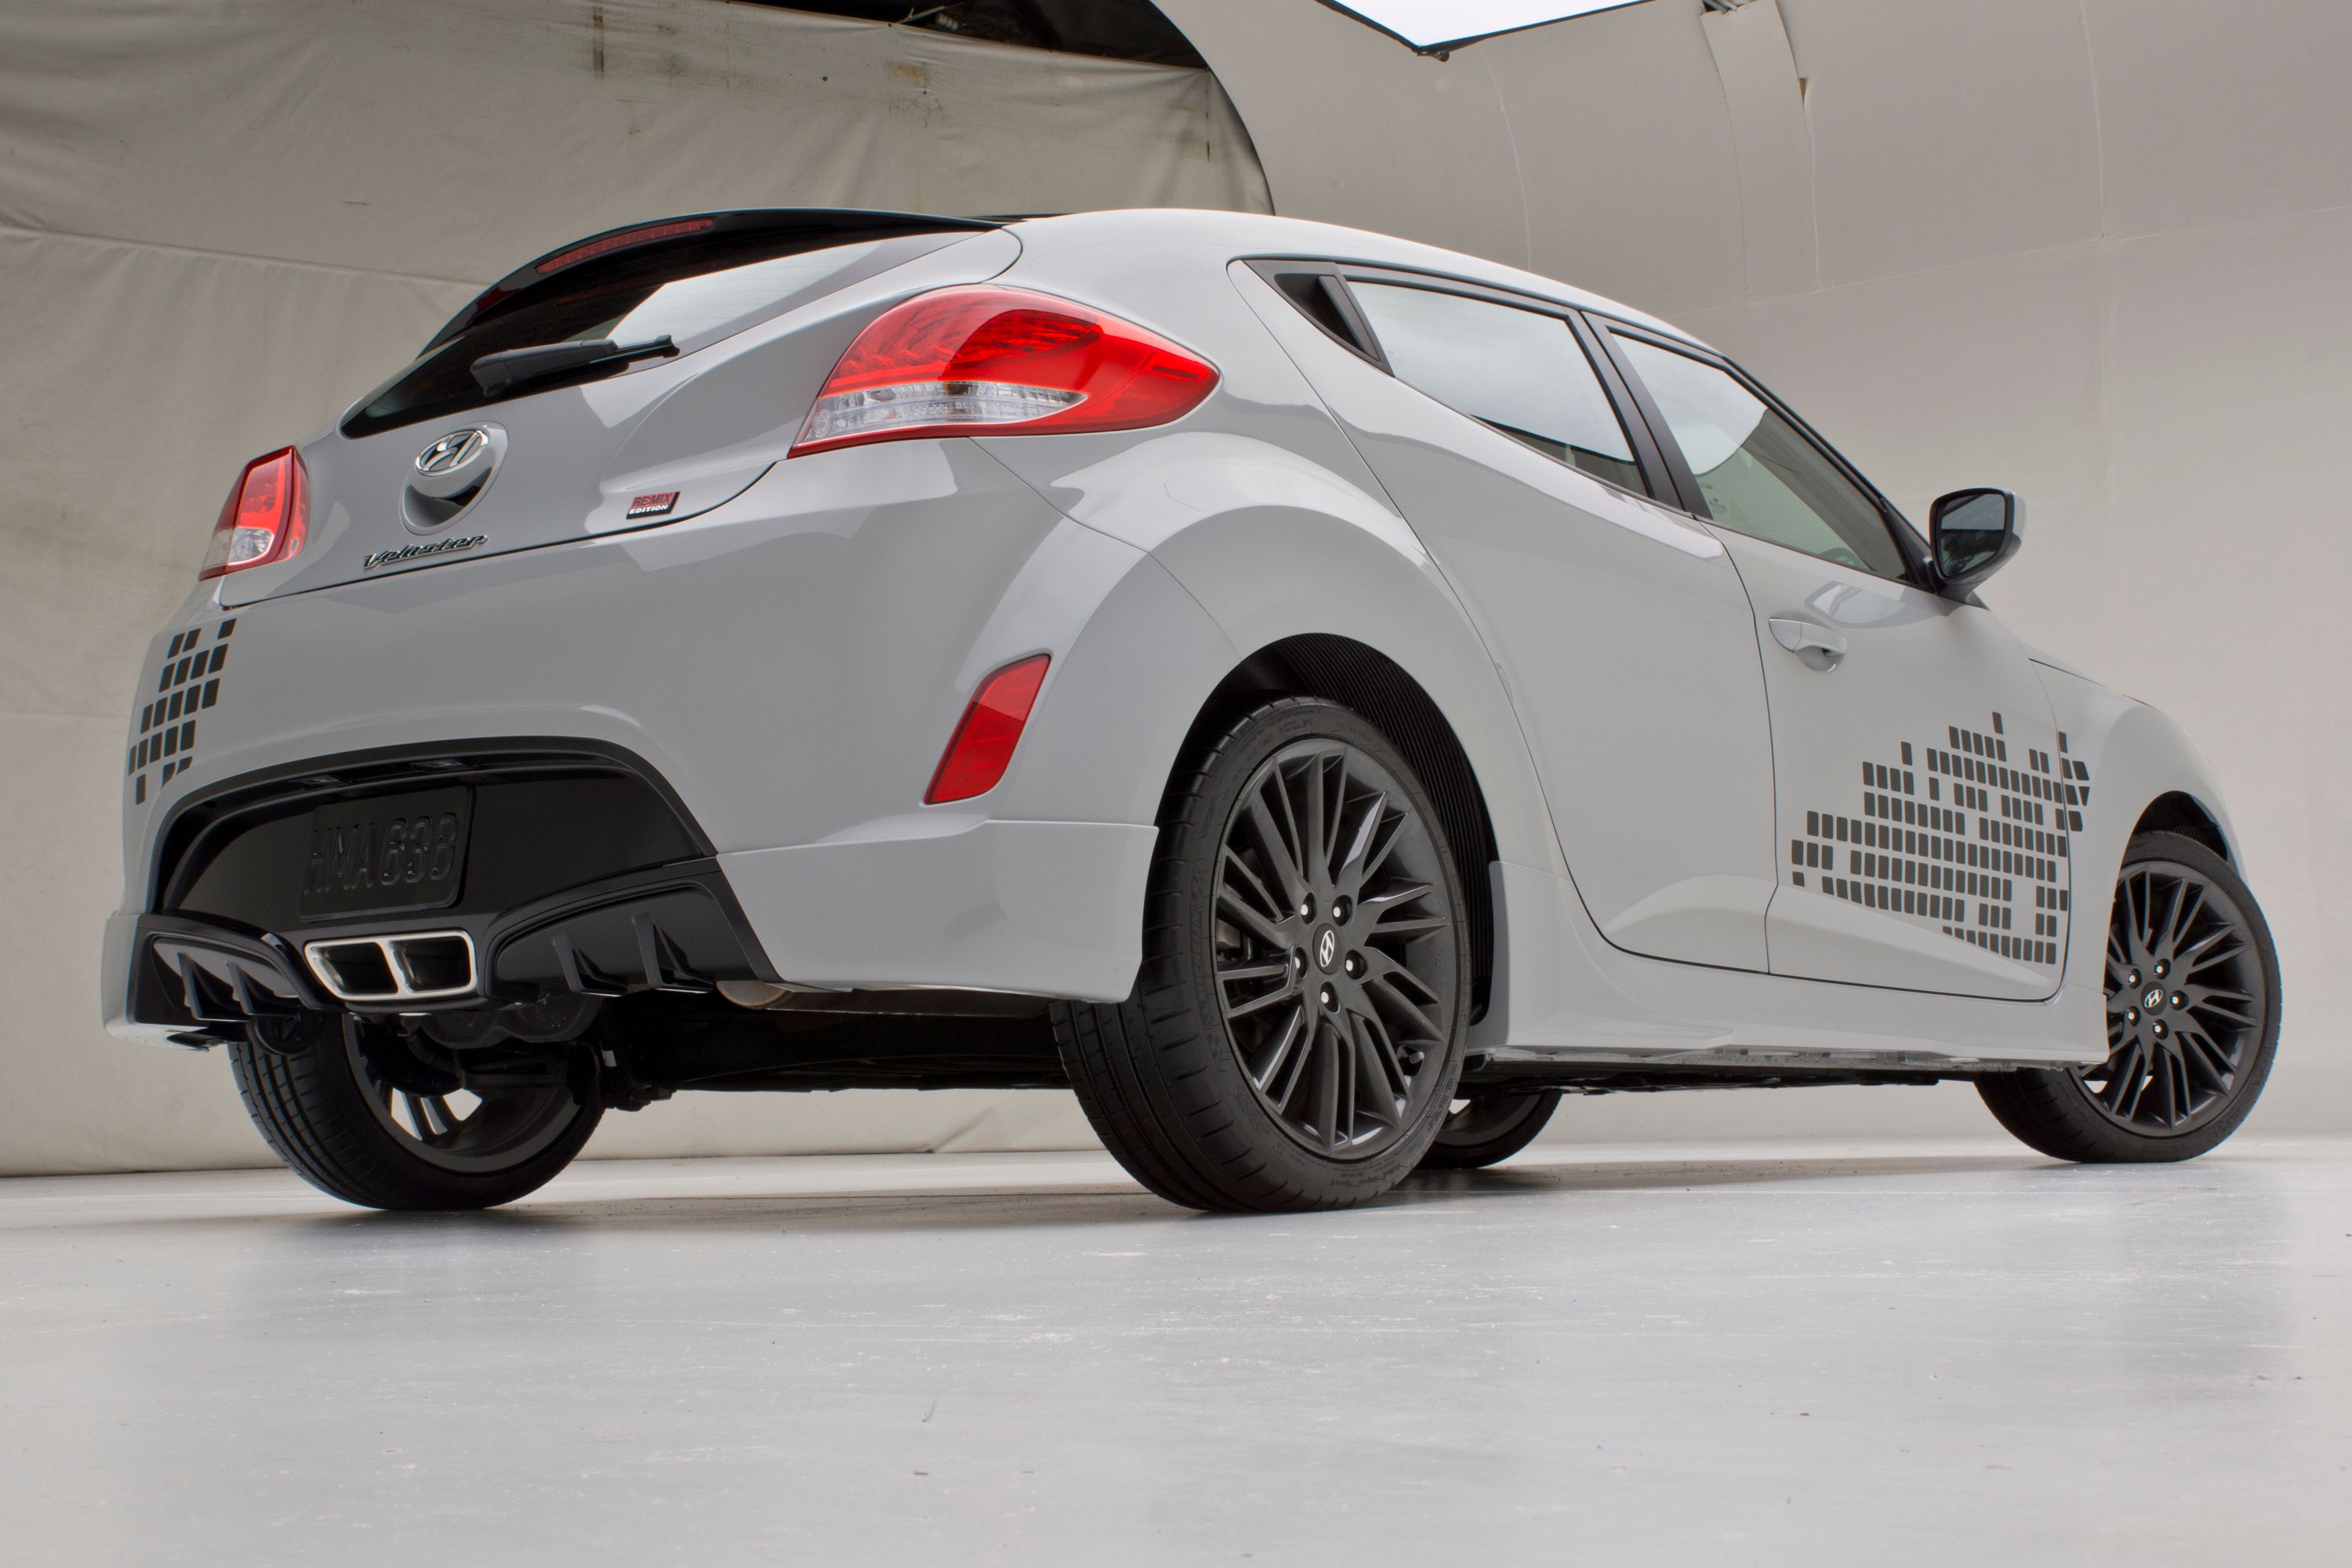 2013 Hyundai Veloster RE:MIX Edition